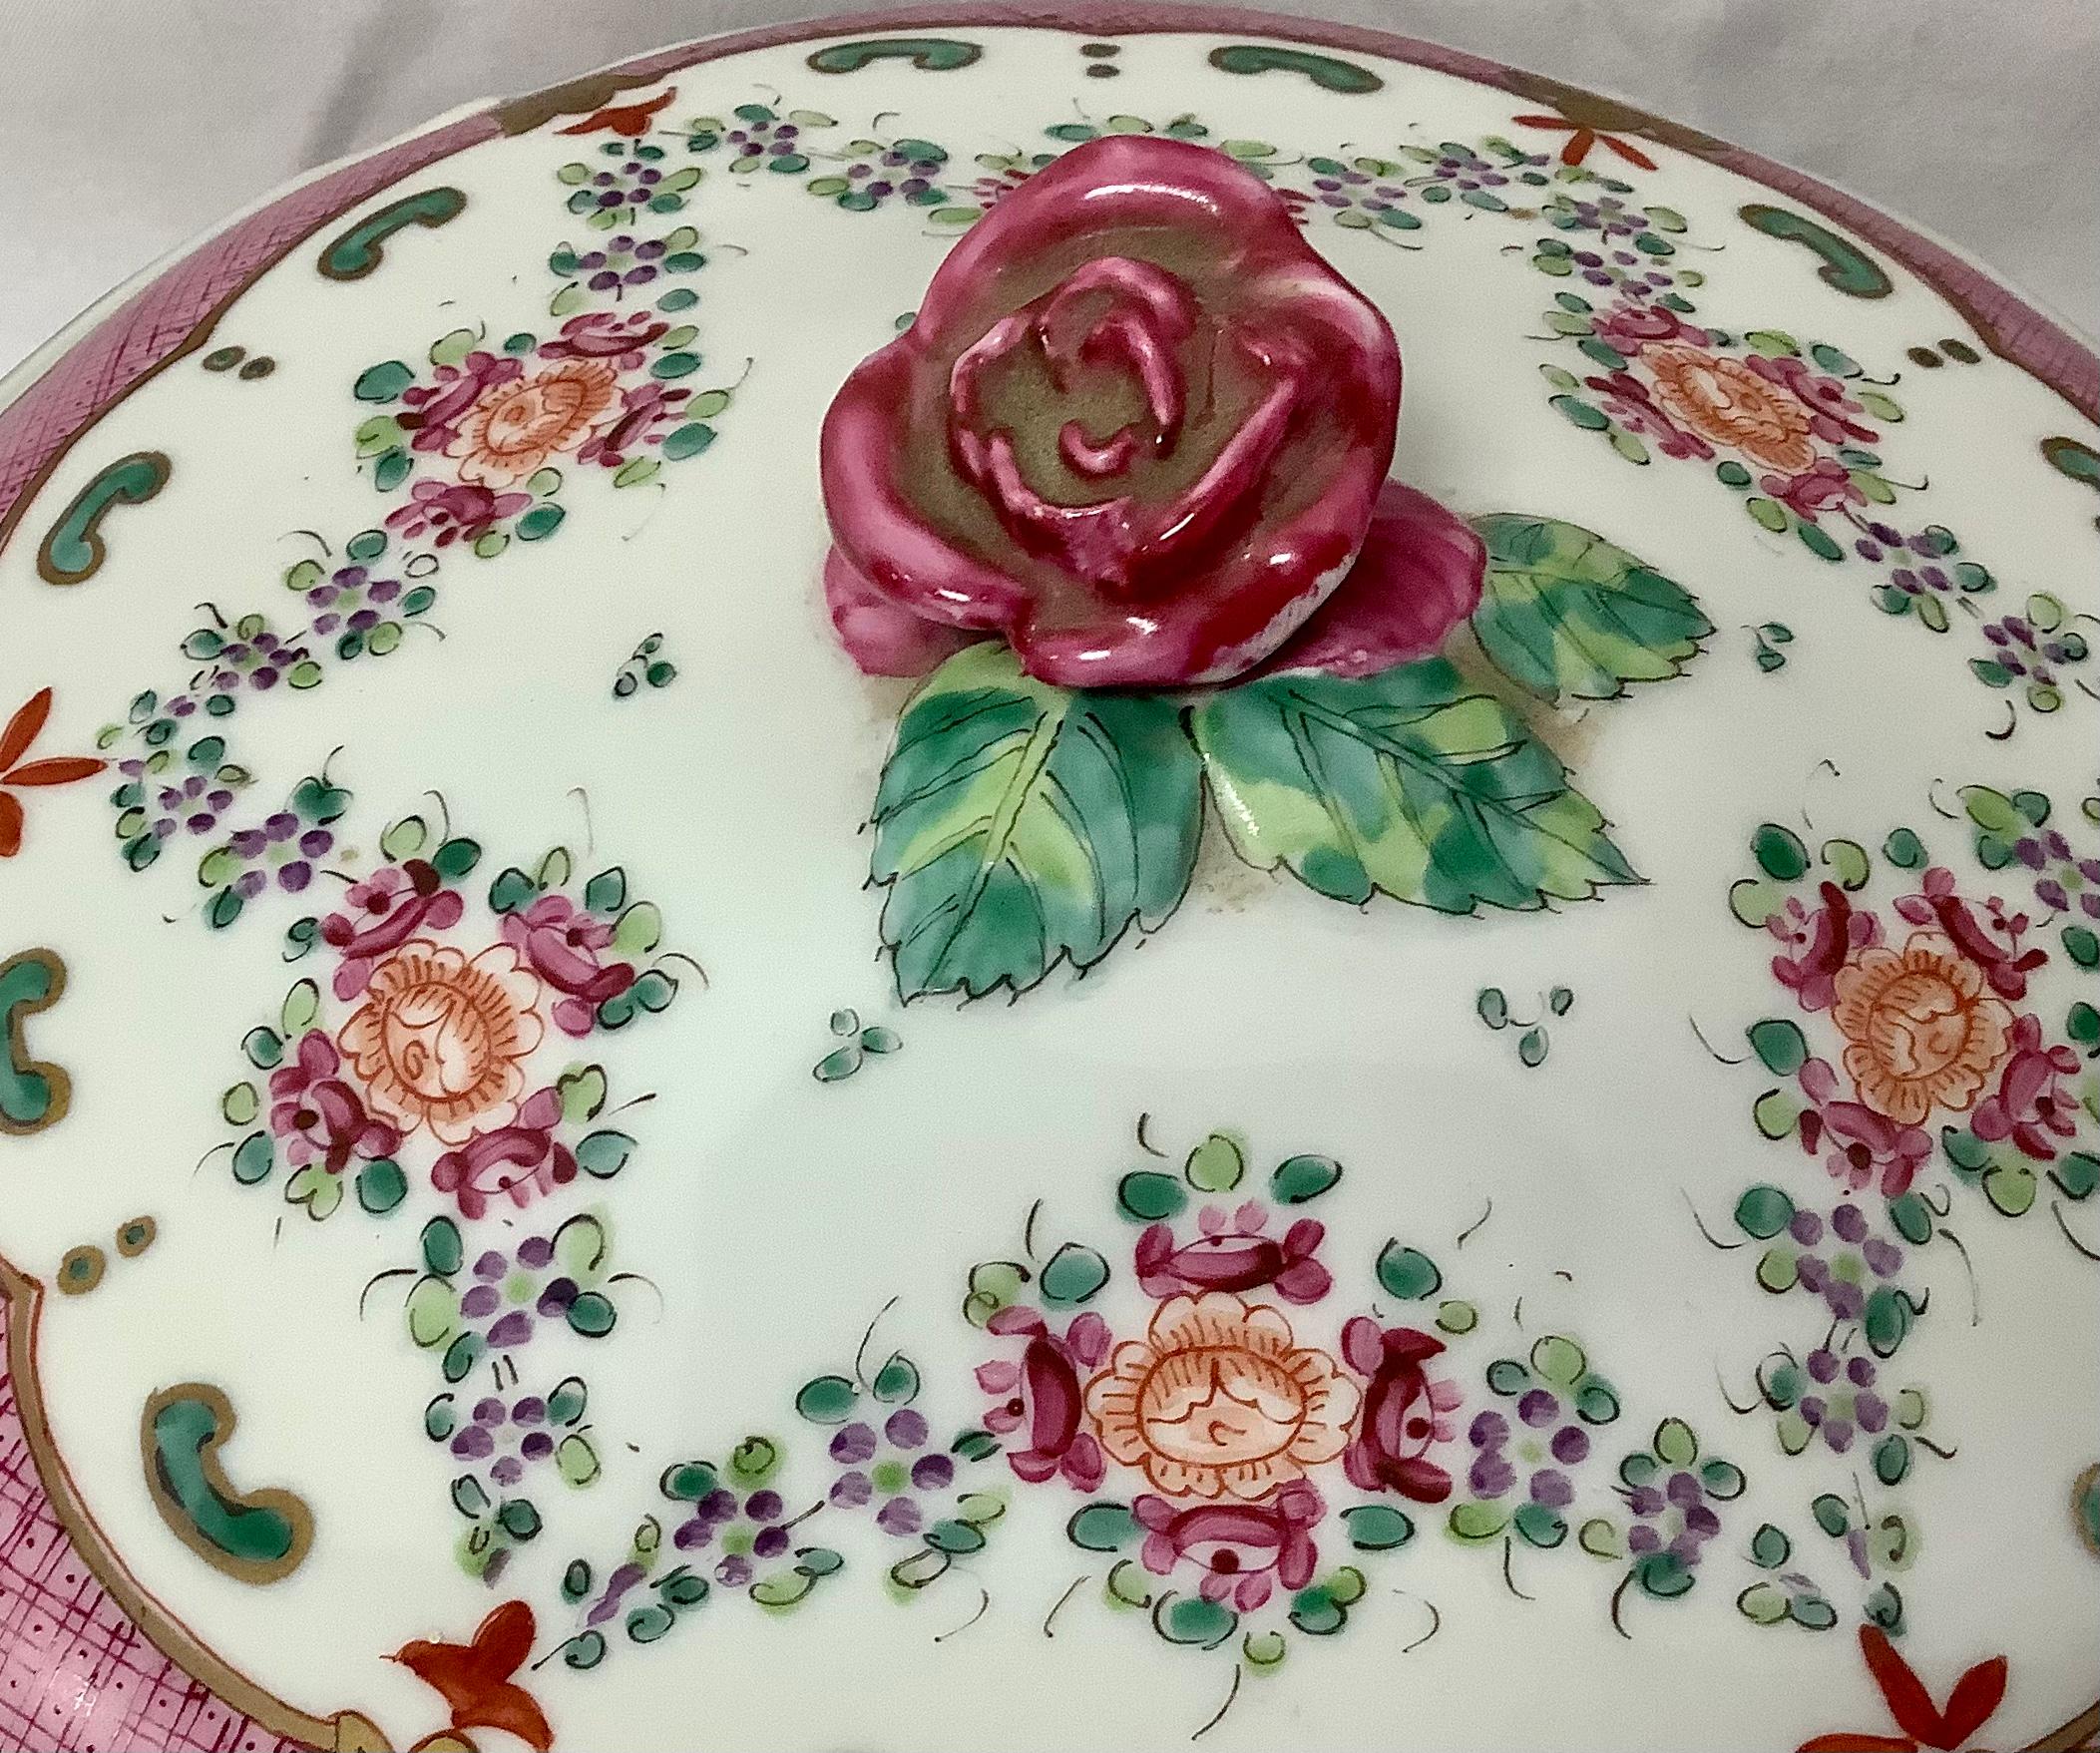 Edme Samson et Cie company. Porcelain covered tureen and under plate. Hand painted with floral and geometric design and gilt highlights. Mostly pink, blues, green and gold on a cream background. A fine example with excellent details.